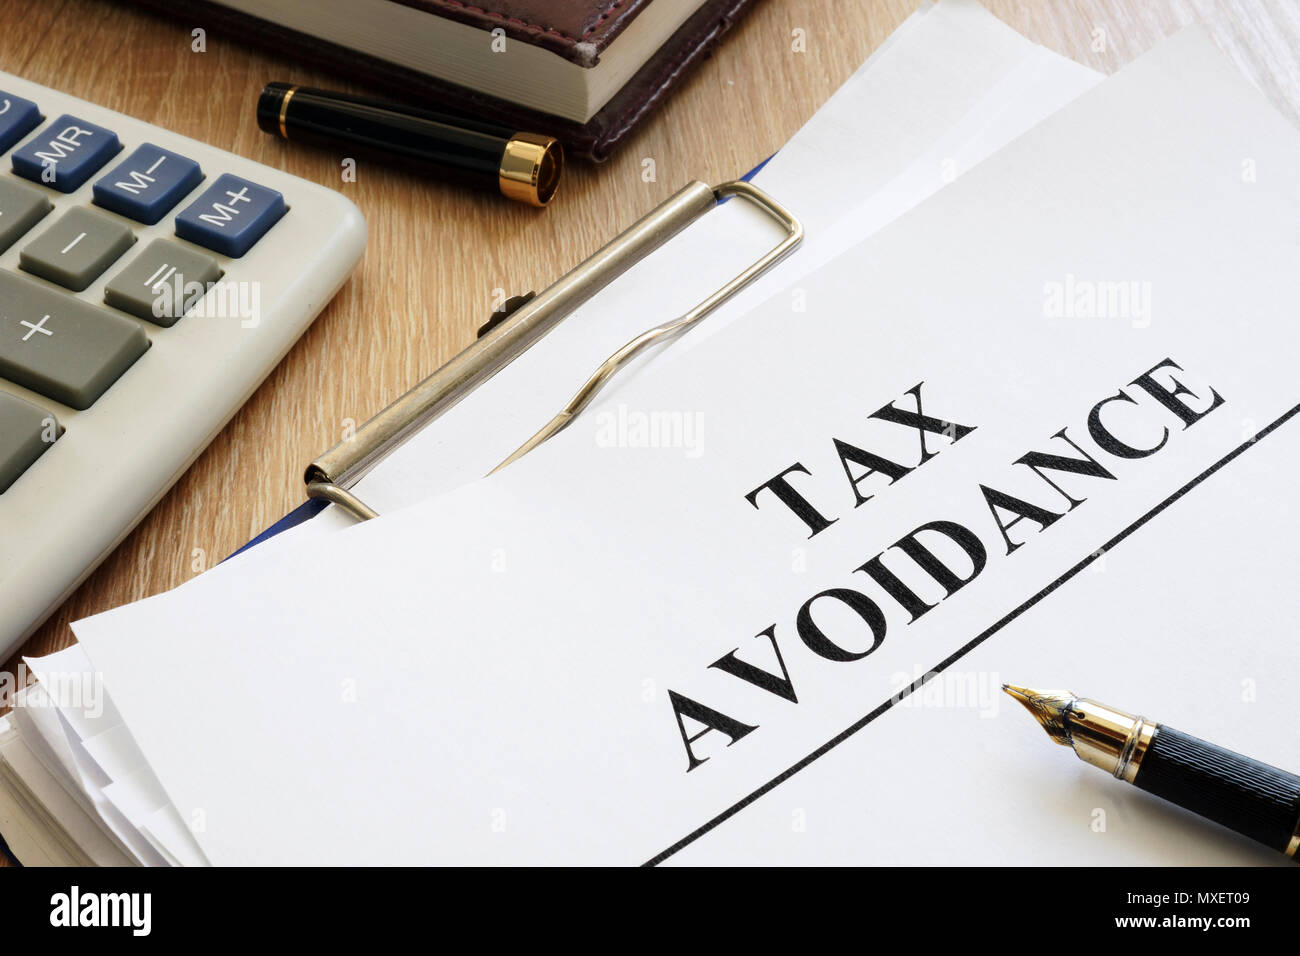 Documents about tax avoidance on a desk. Stock Photo